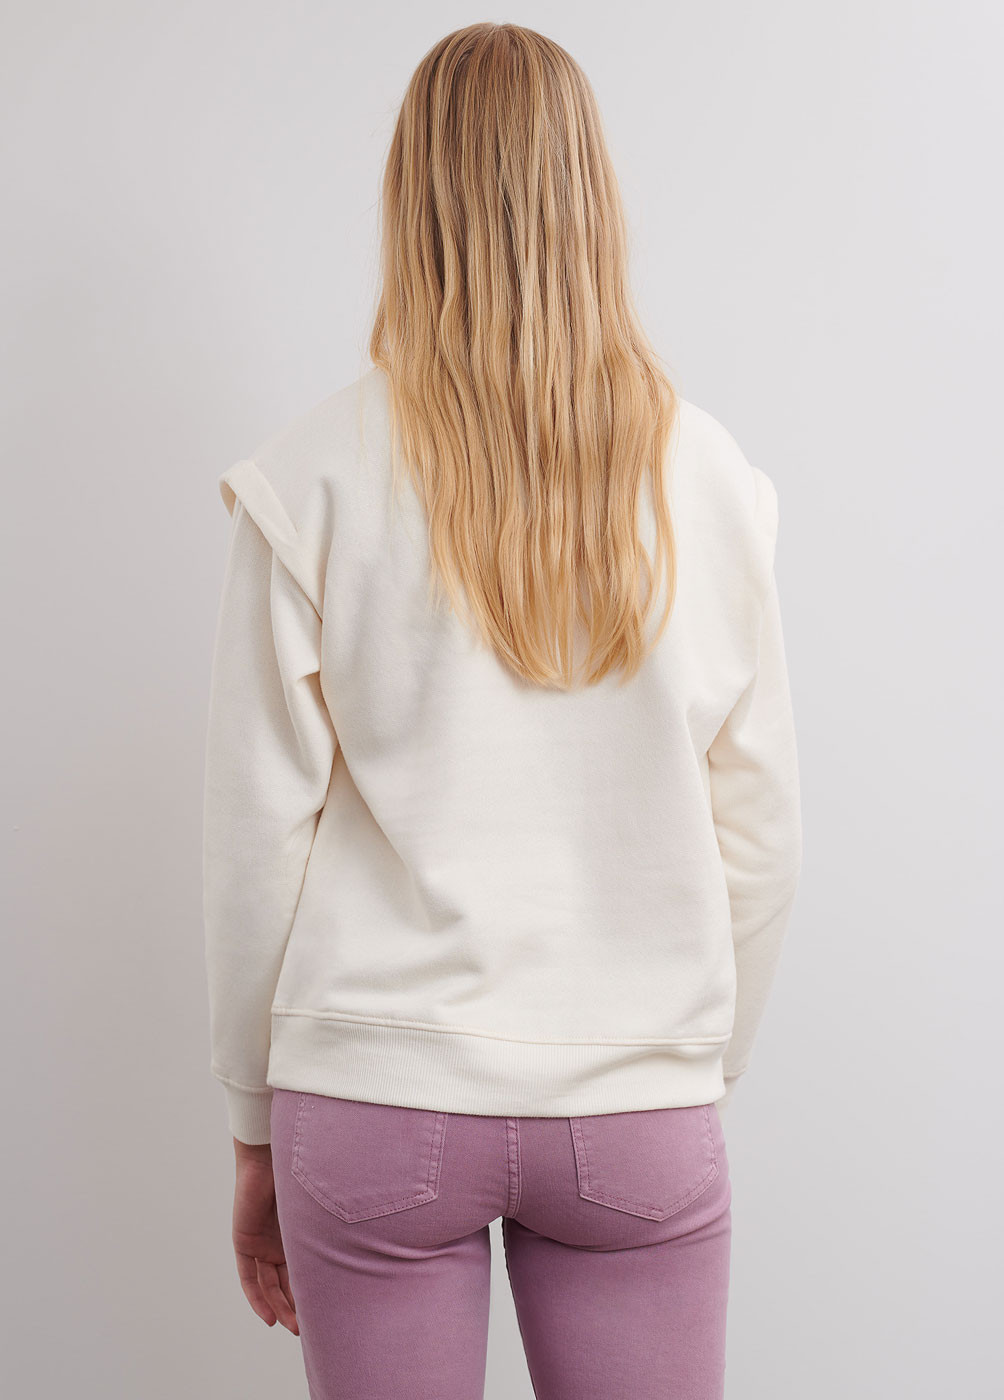 ETNIA EMBROIDERED SWEATSHIRT WITH SHOULDER DETAIL